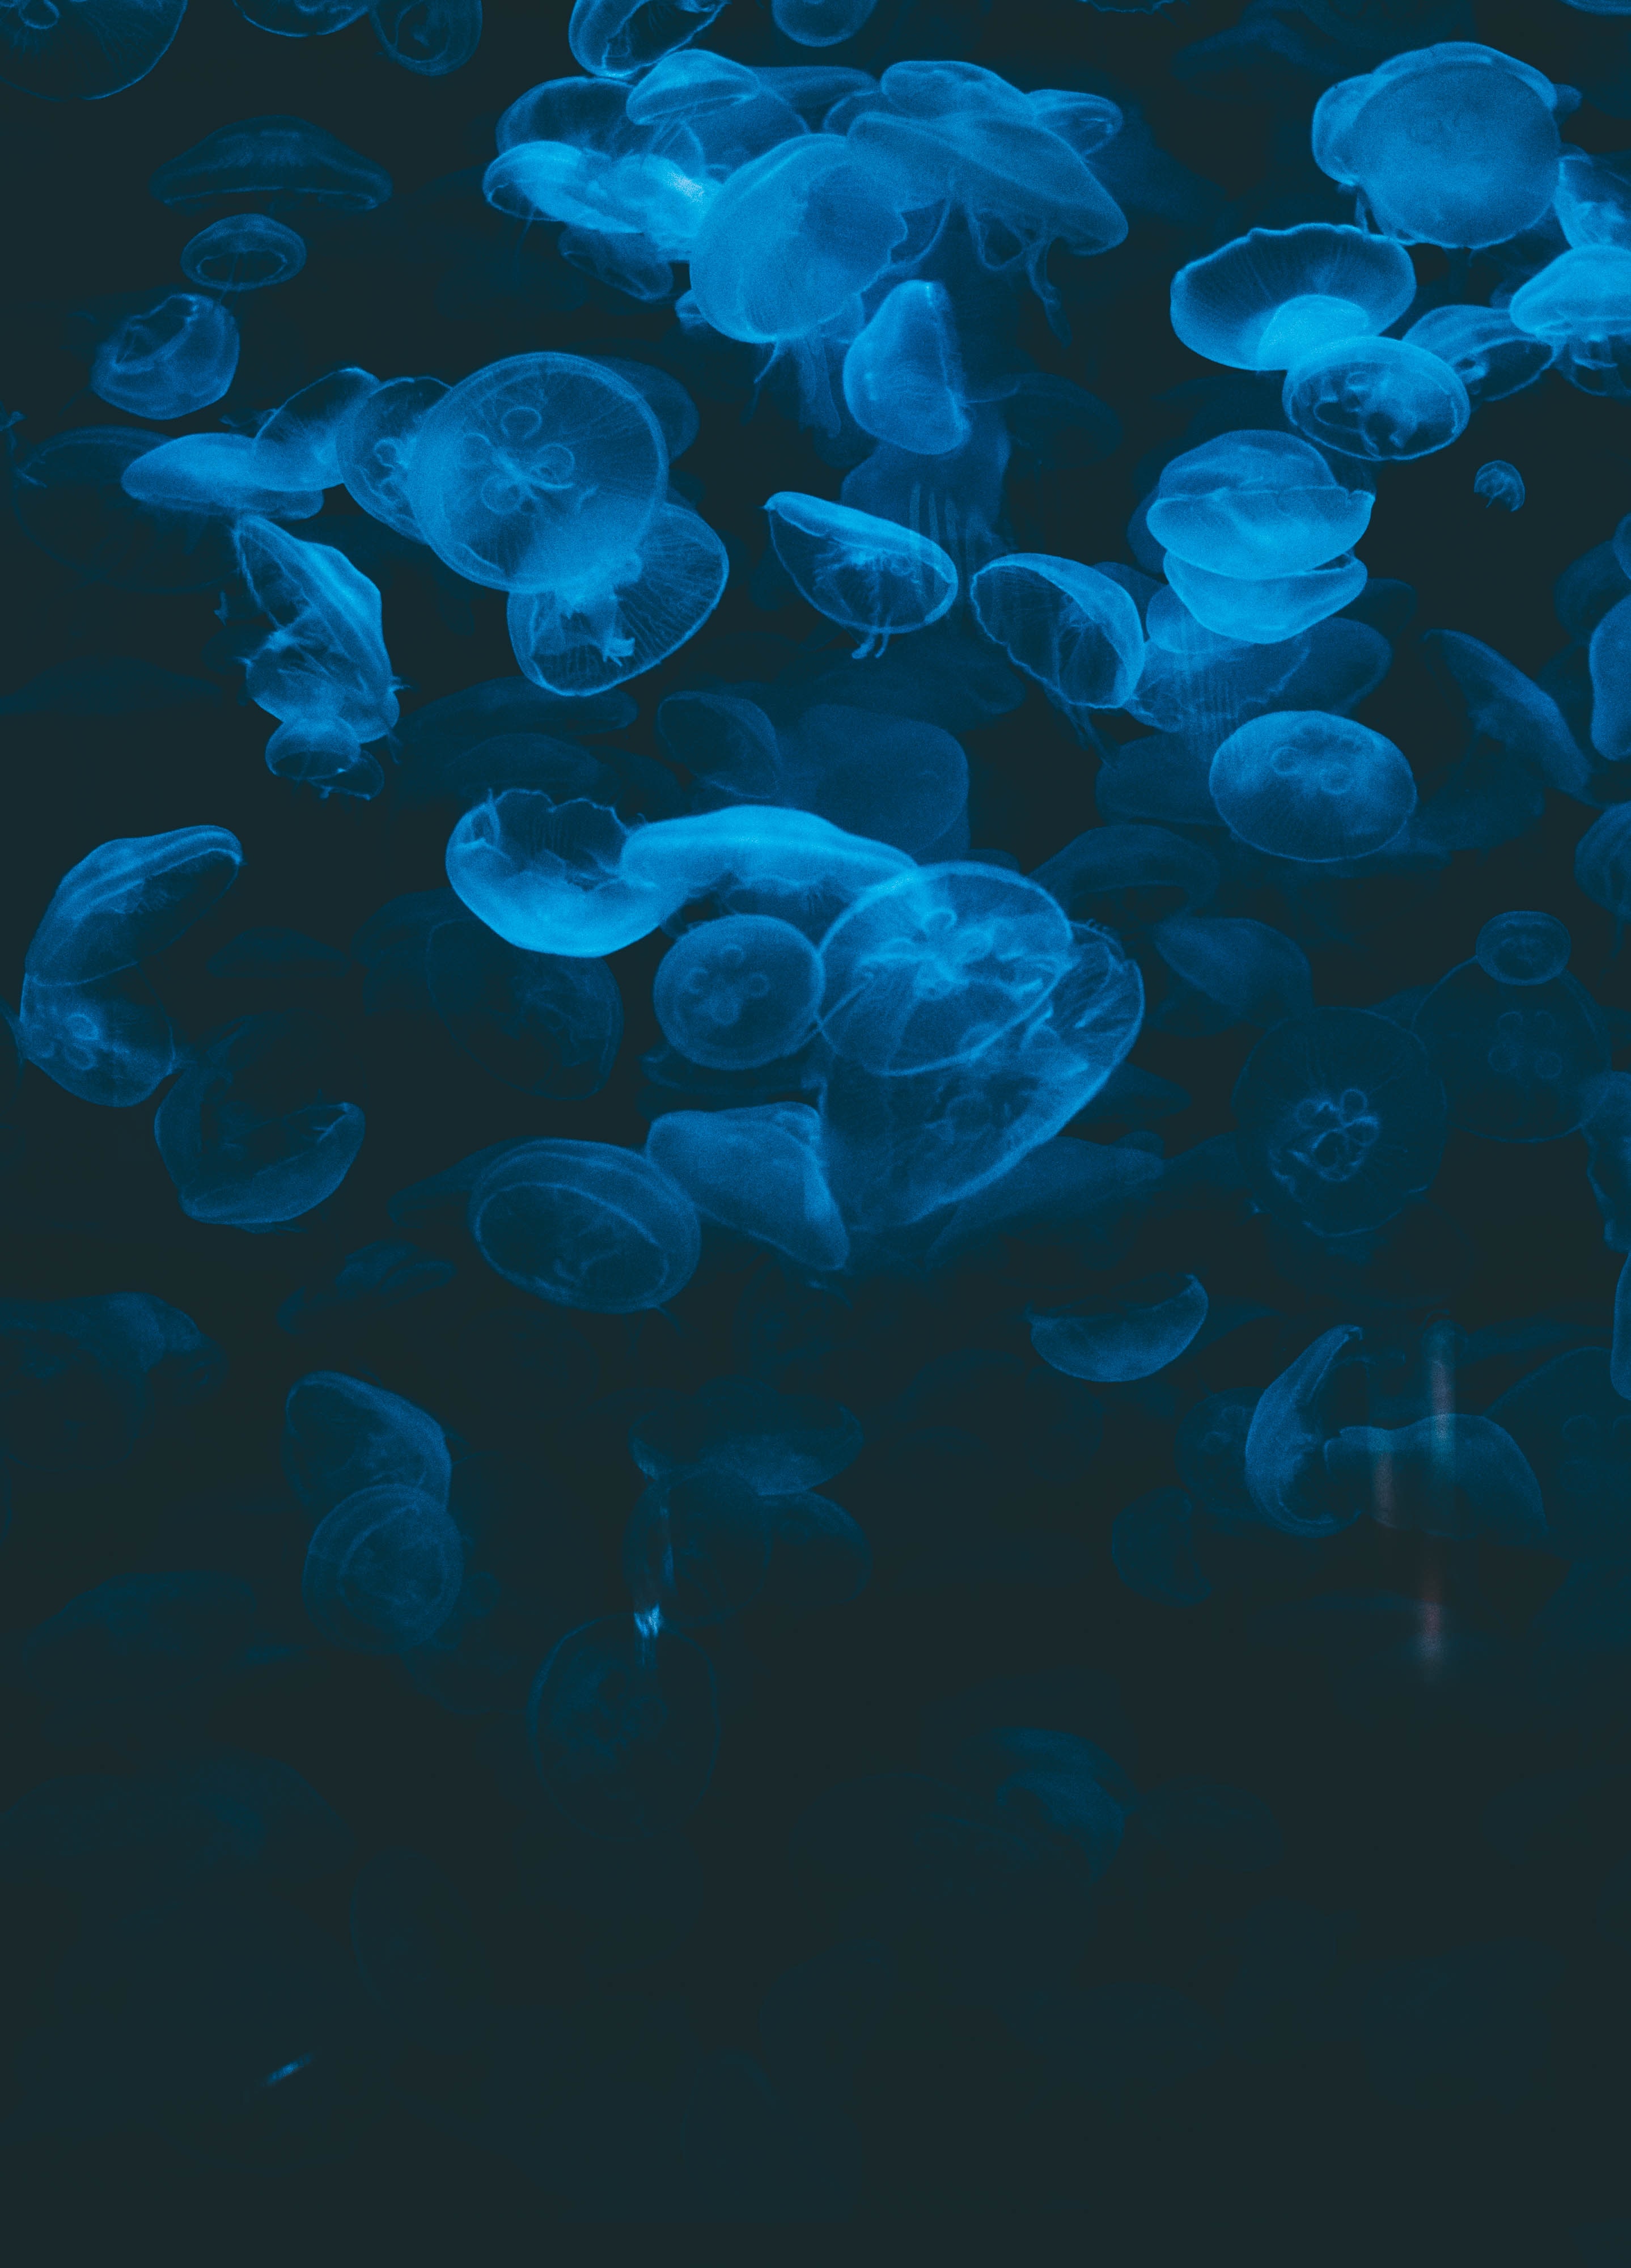 63055 Screensavers and Wallpapers Underwater for phone. Download animals, jellyfish, blue, transparent, dark, under water, underwater pictures for free